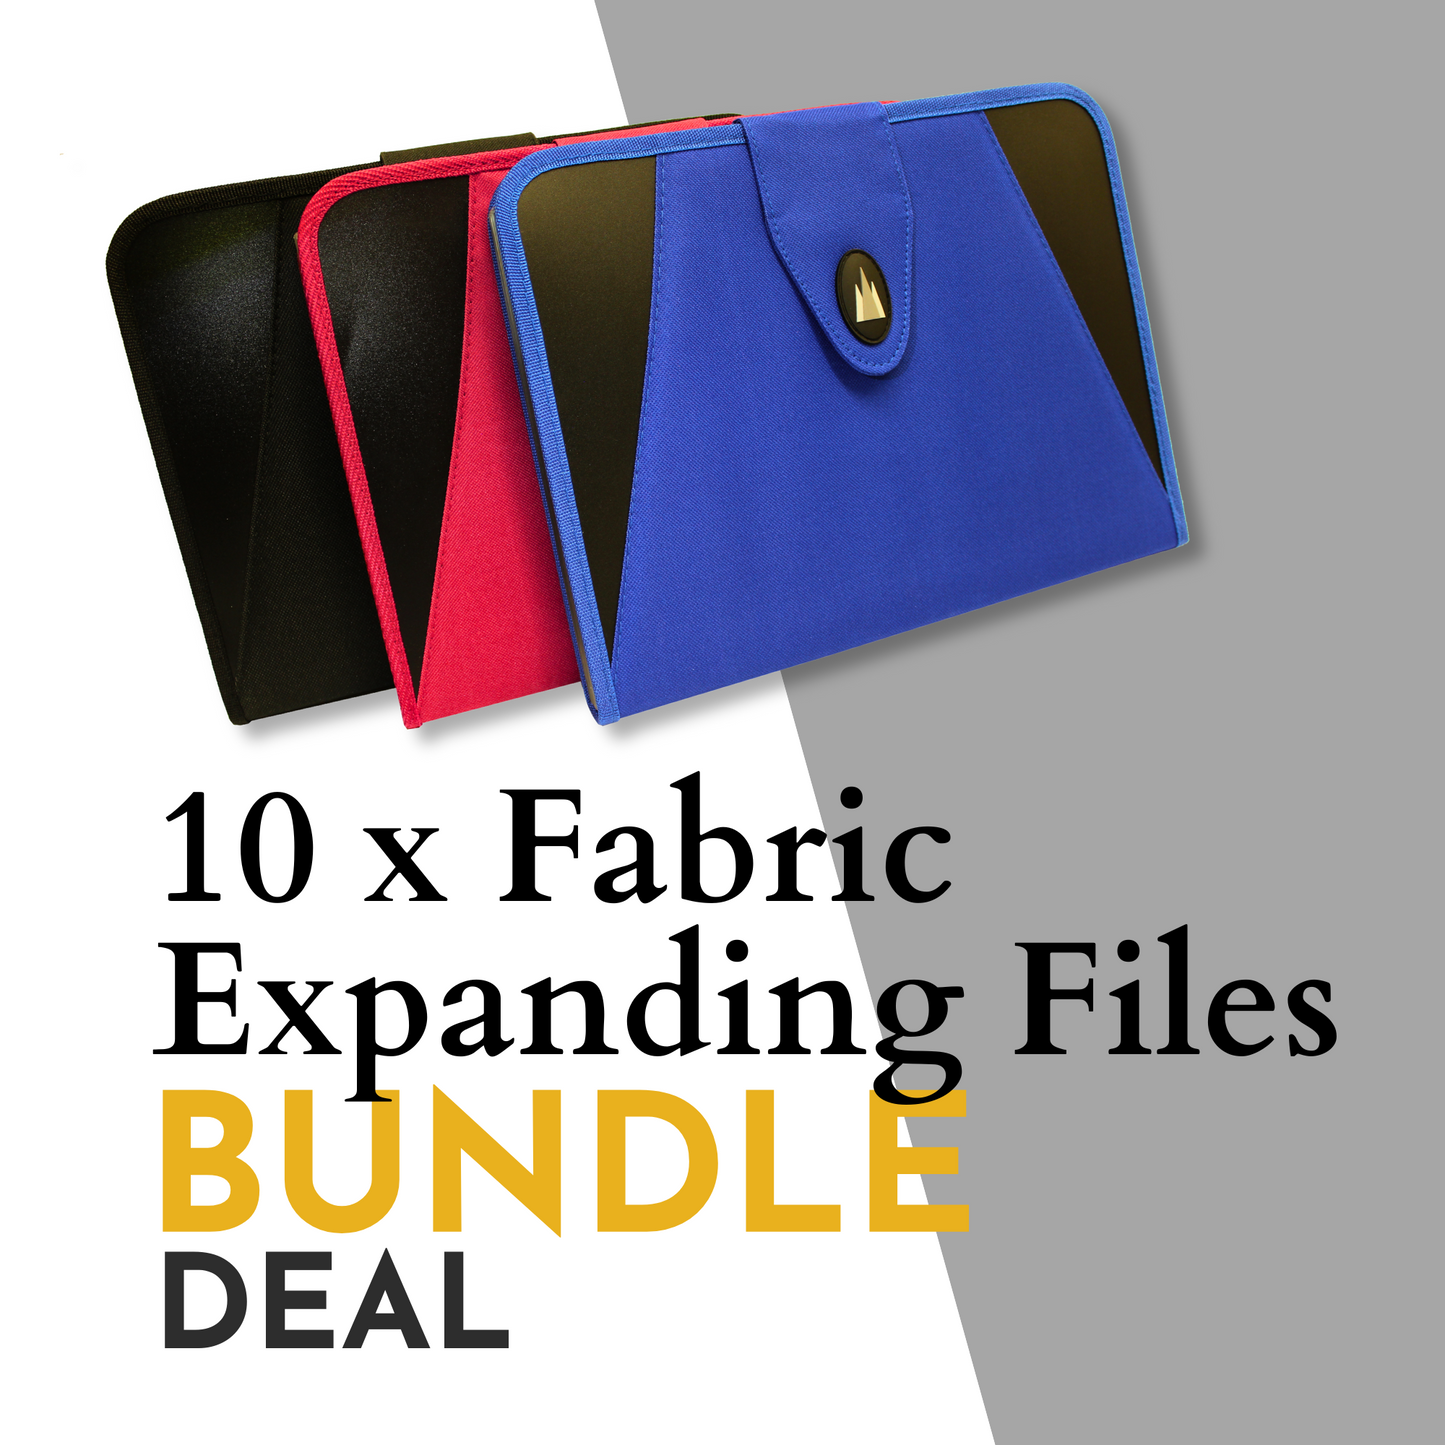 Promotional image featuring three fabric expanding files, one black, one red and the other blue, each angled to display their design. Overlaid text reads '10 x Fabric Expanding Files BUNDLE DEAL', suggesting a special offer on the items. The text is styled in different sizes and colours for visual impact.